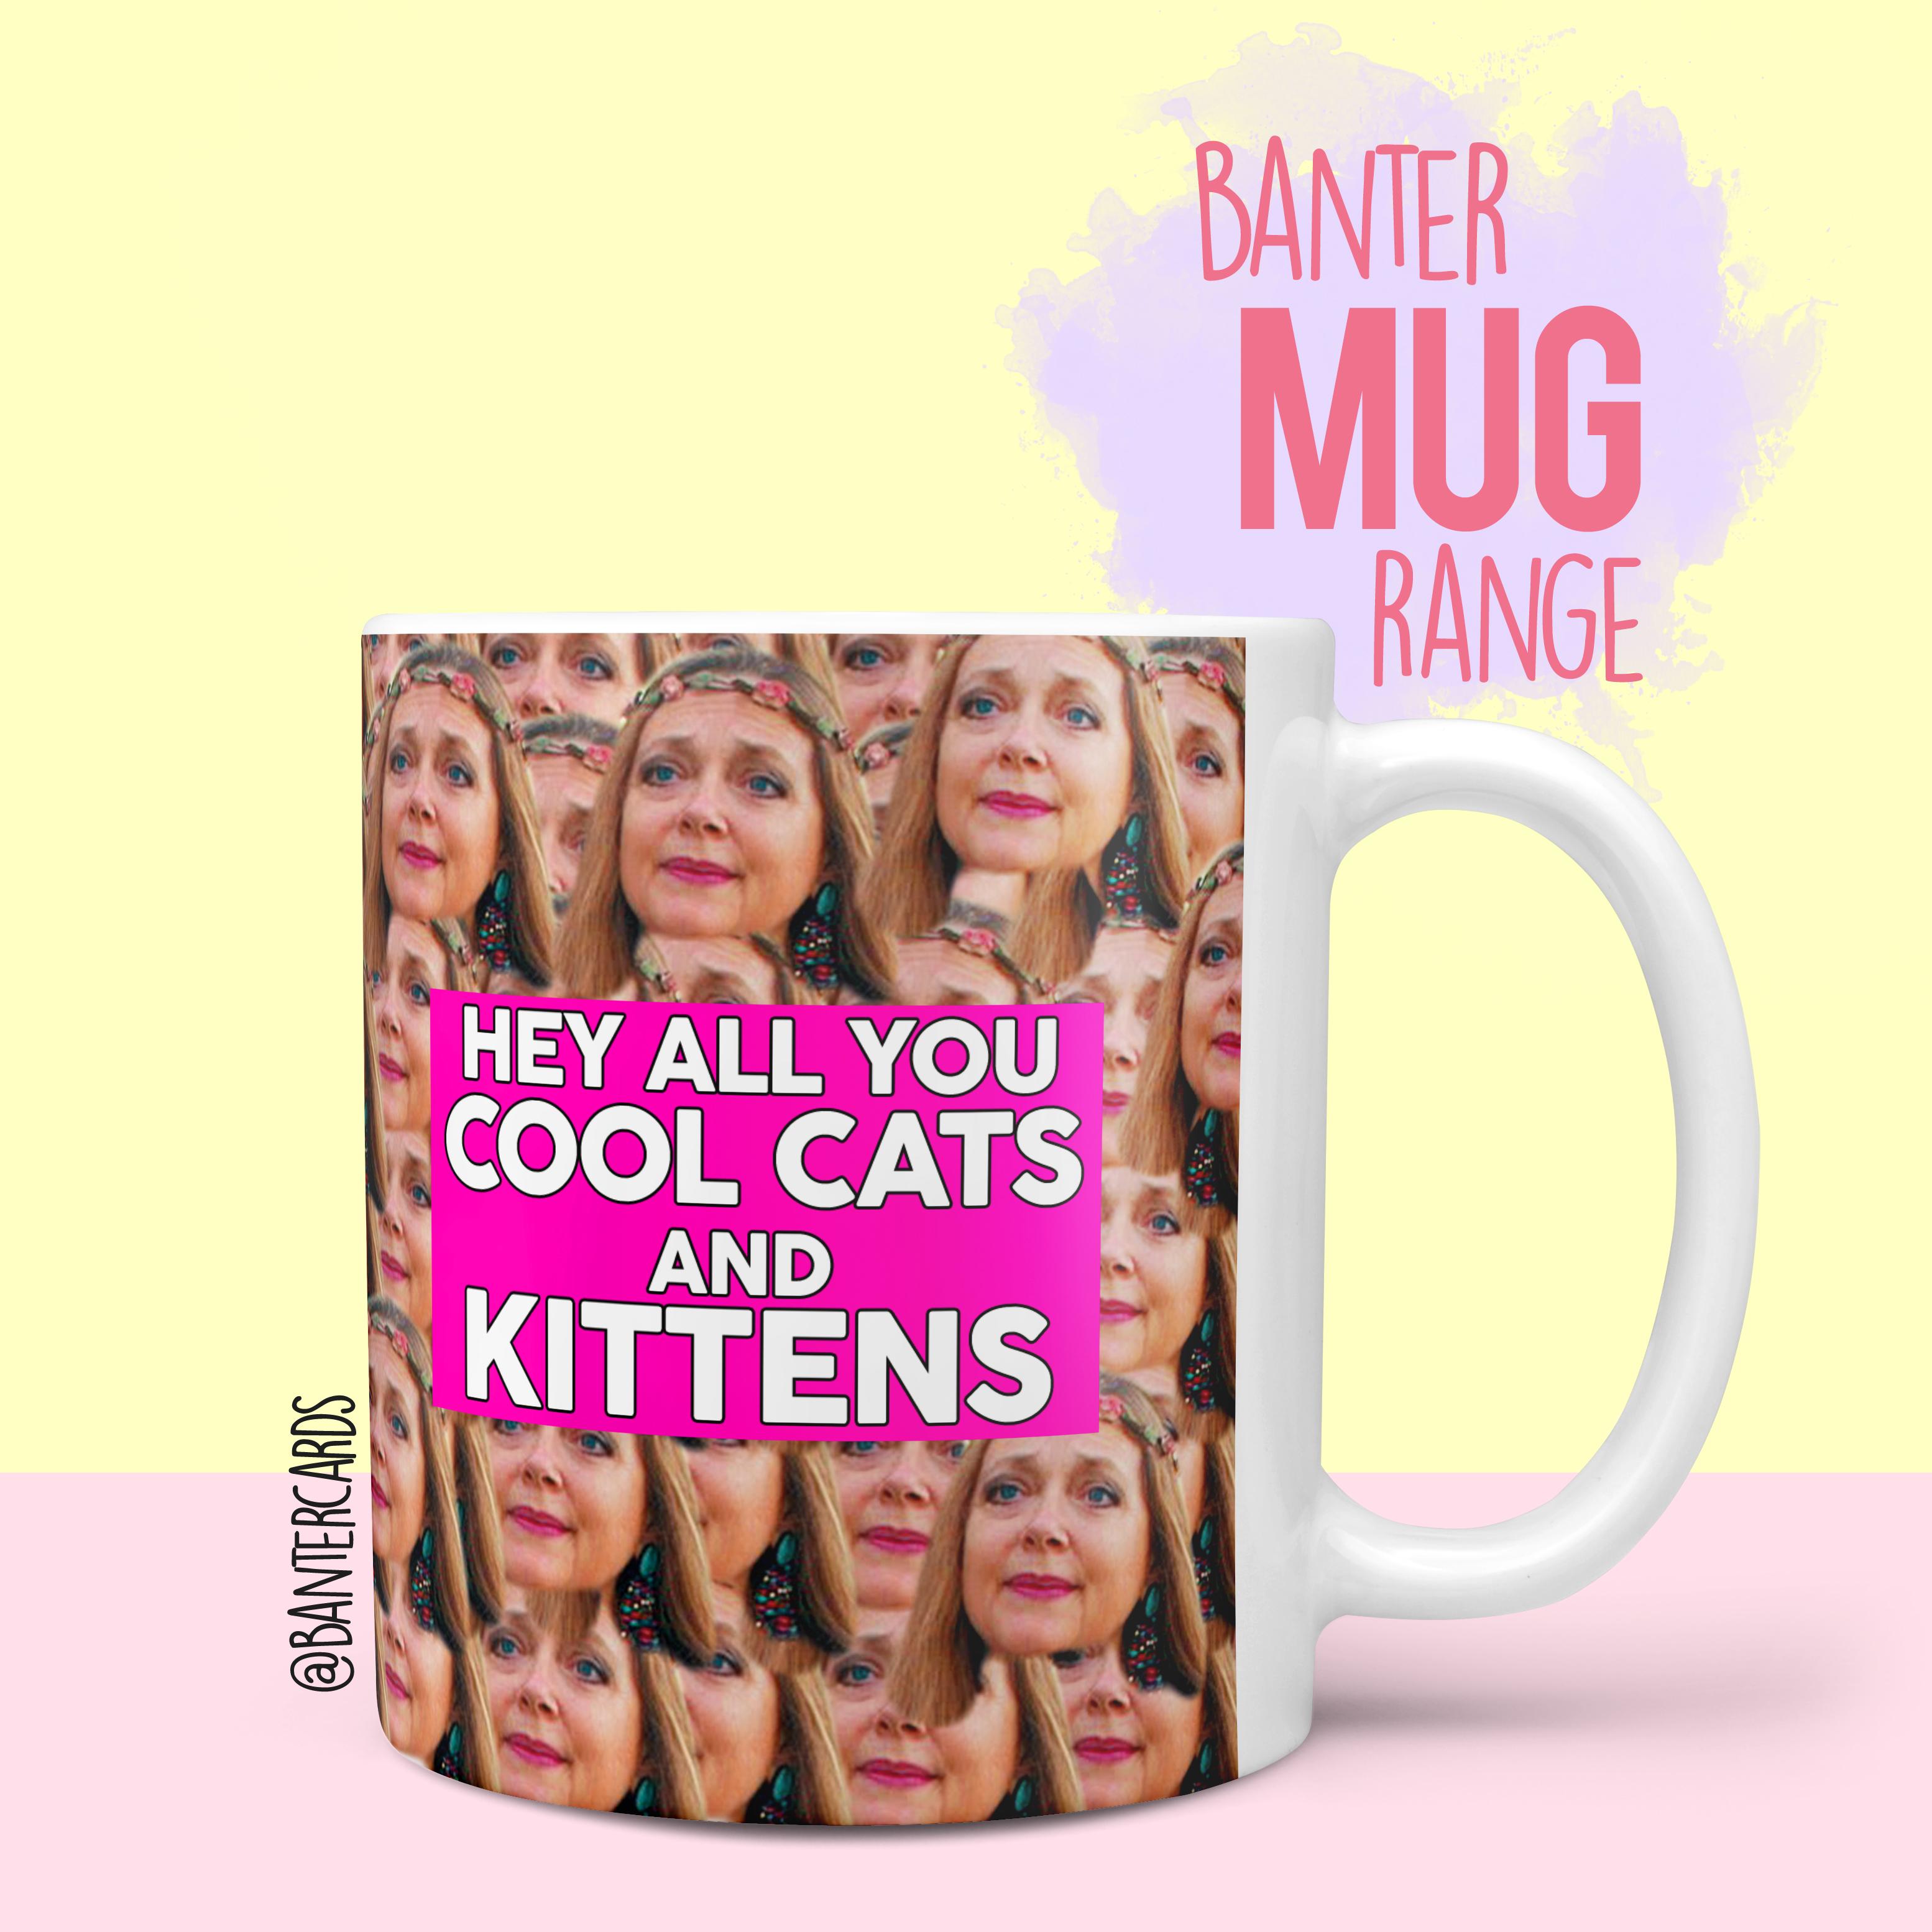 HEY ALL YOU COOL CATS AND KITTENS TIGER KING CAROLE BASKIN FUNNY CUP MUG